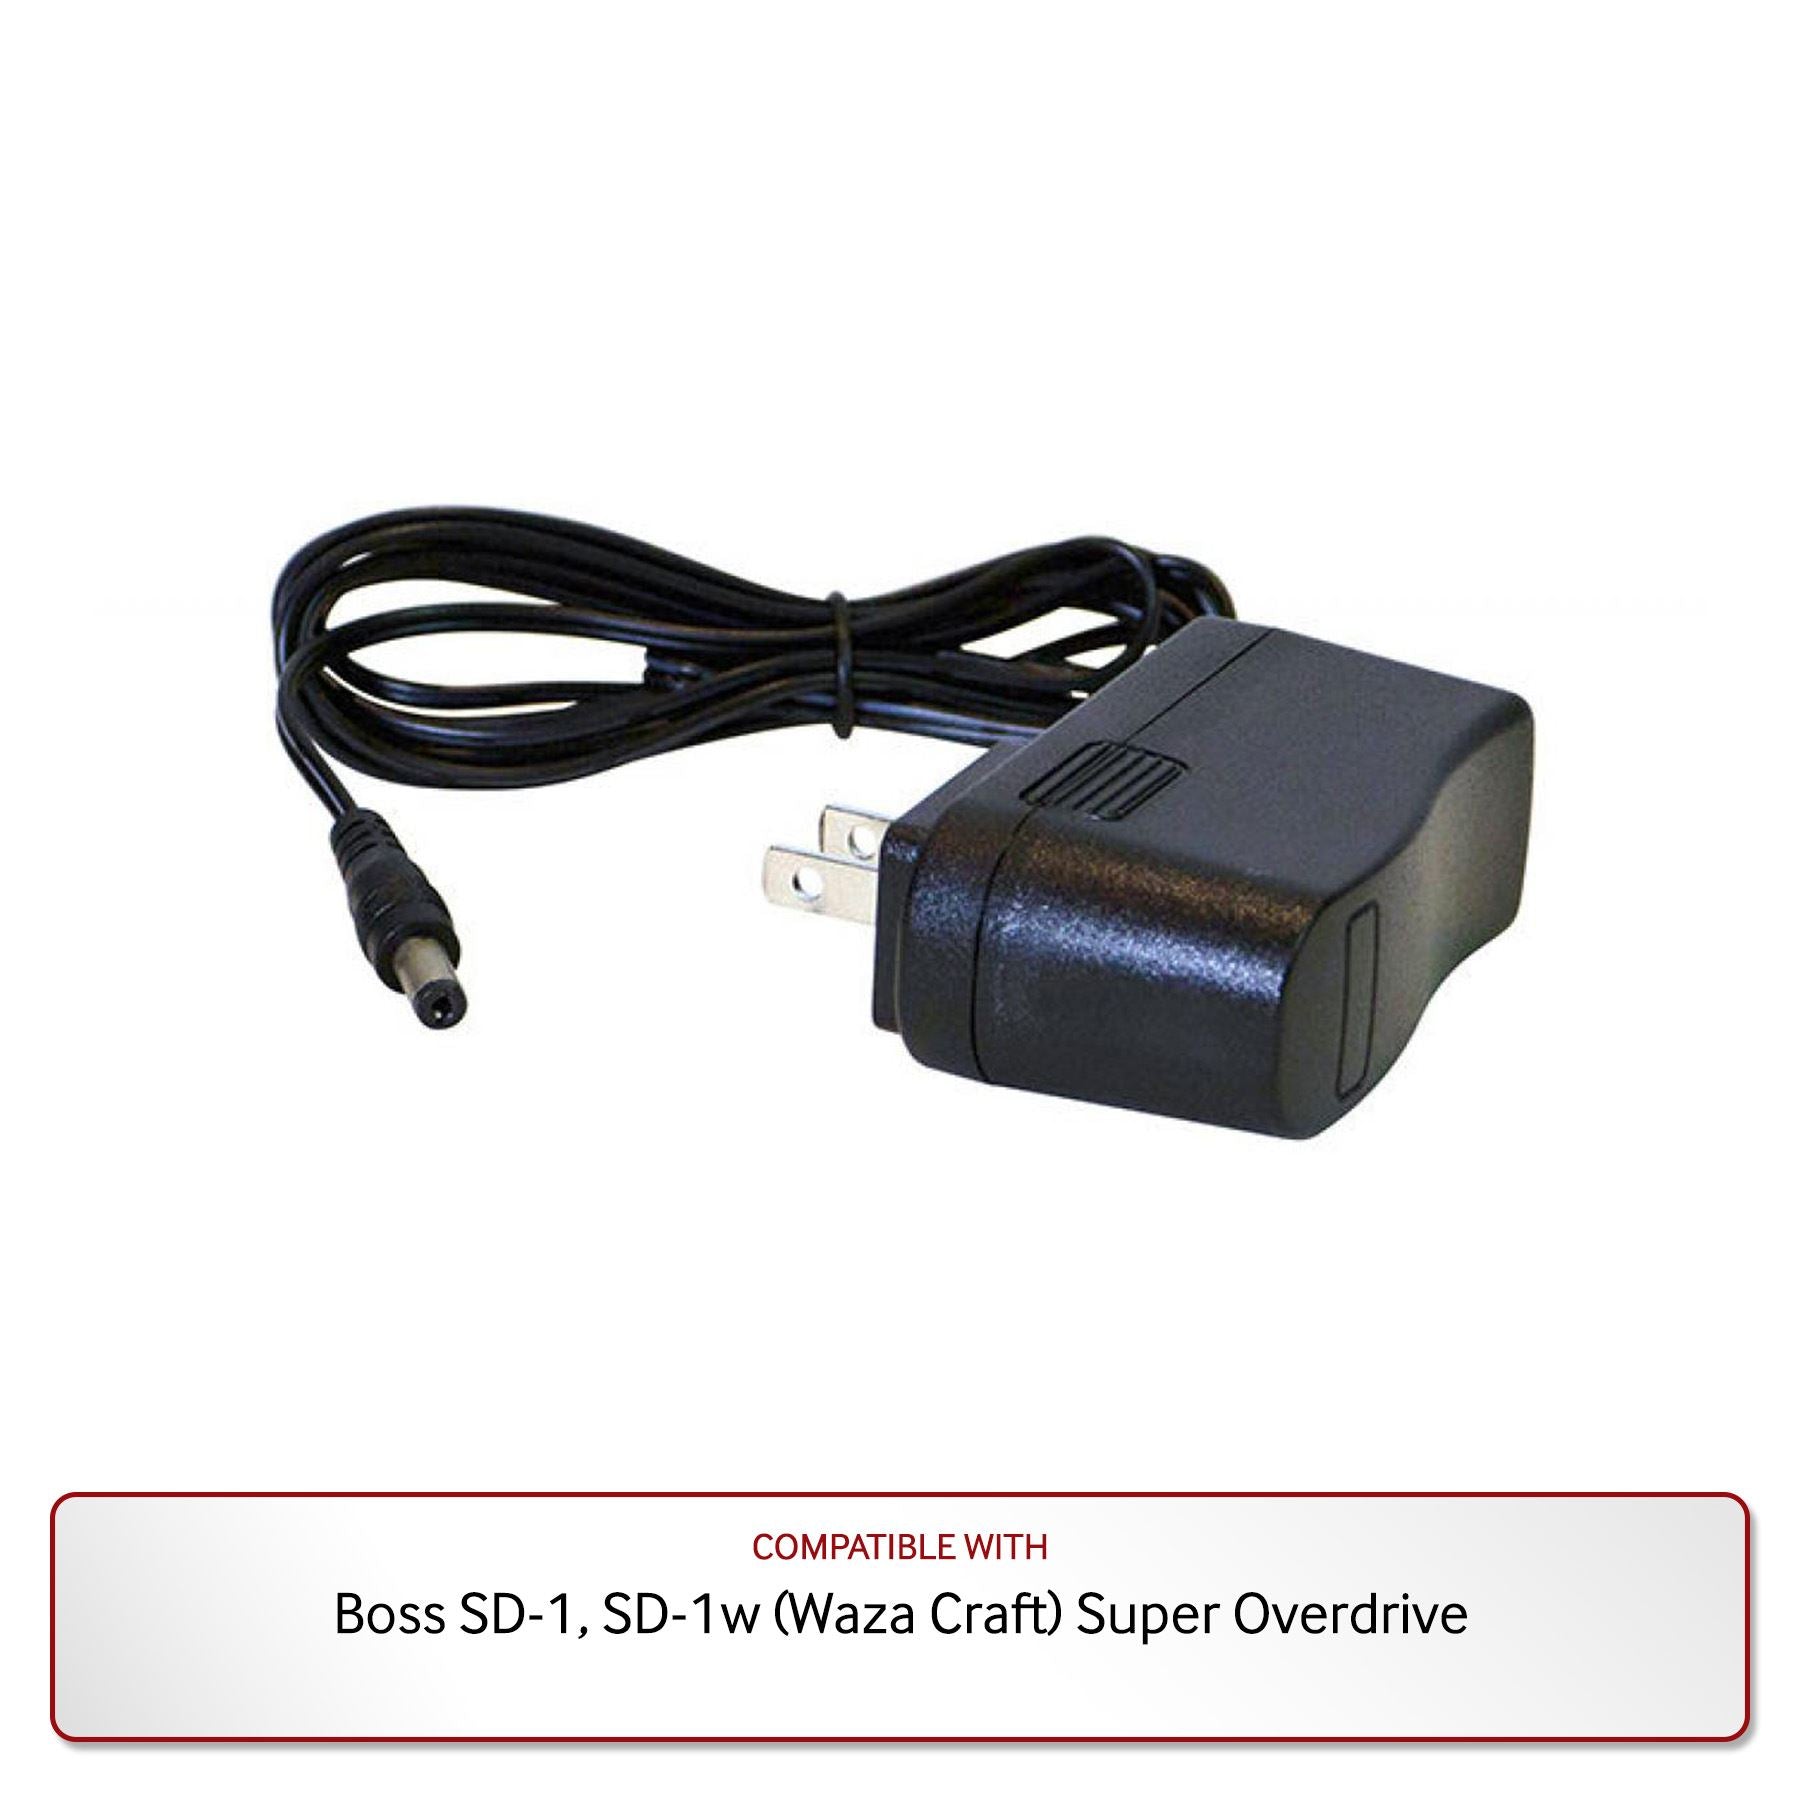 9V Power Supply for Boss SD-1, SD-1w (Waza Craft) Super Overdrive